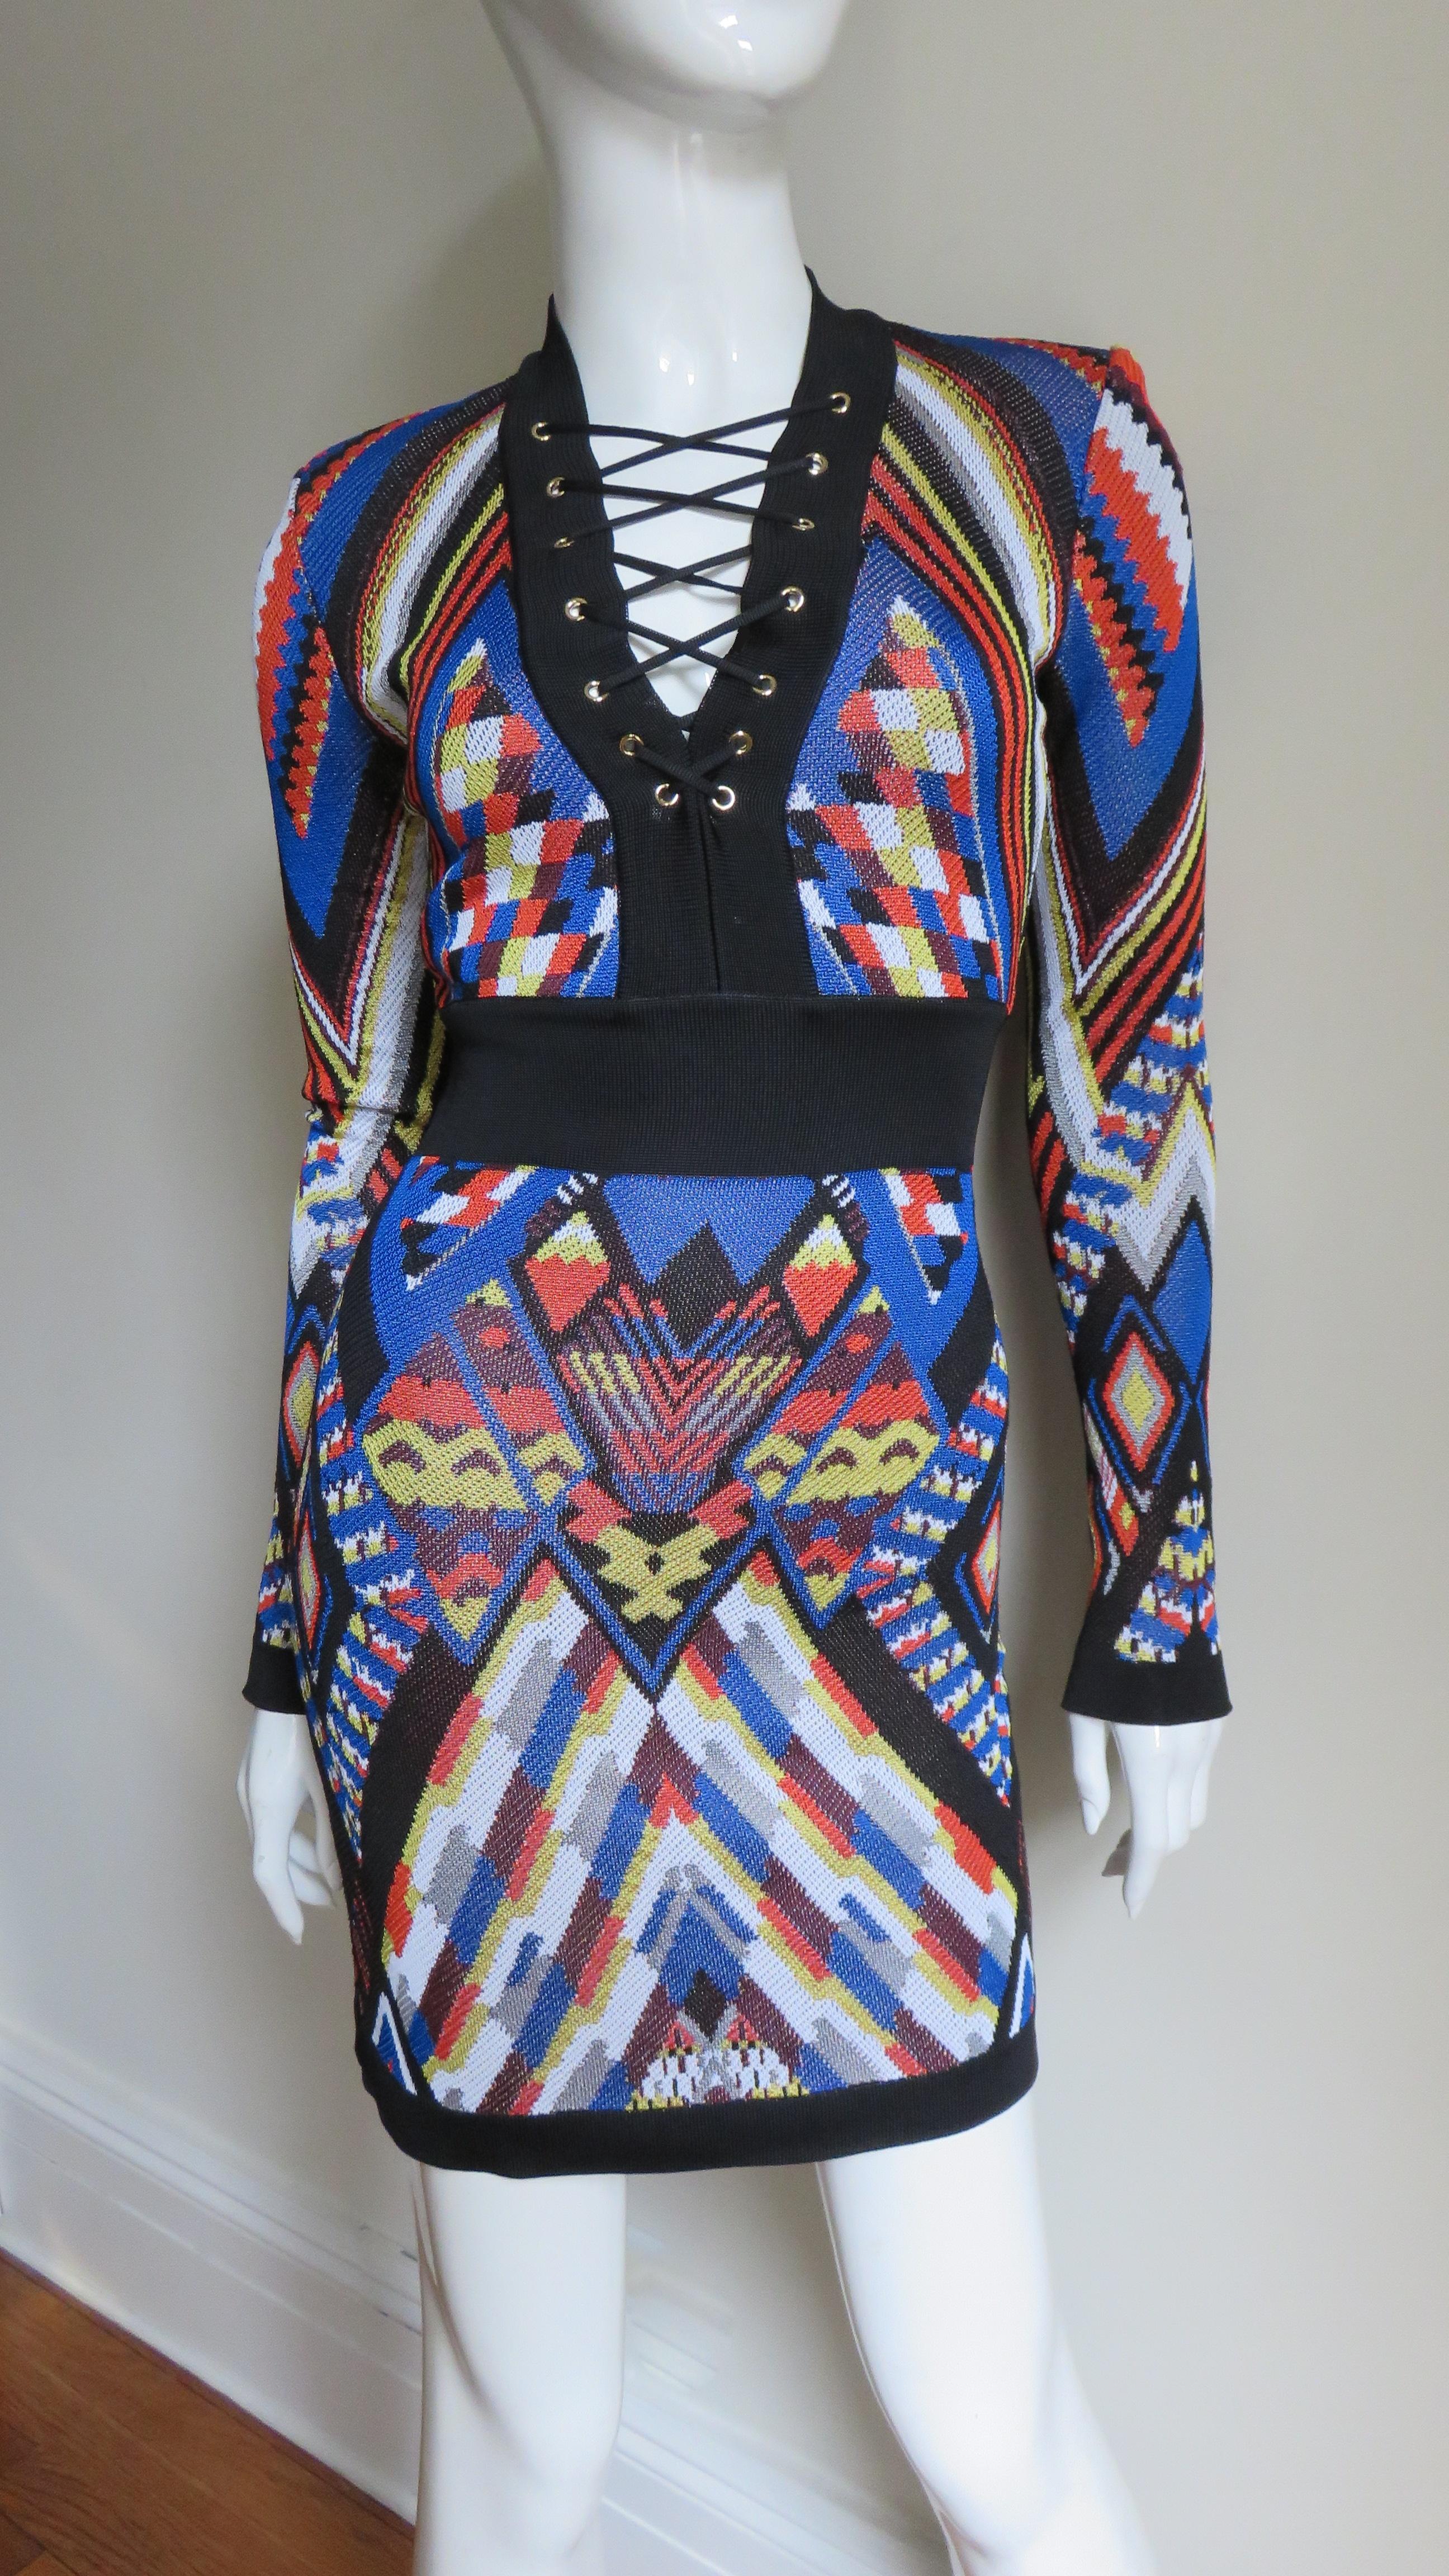 A gorgeous geometric ikat print stretch dress from Pierre Balmain in red, blue, yellow, black and white.  It has long sleeves and a V neckline with functional black lacing to just below the bust.  The trim on the neckline, cuffs, hem and band at the